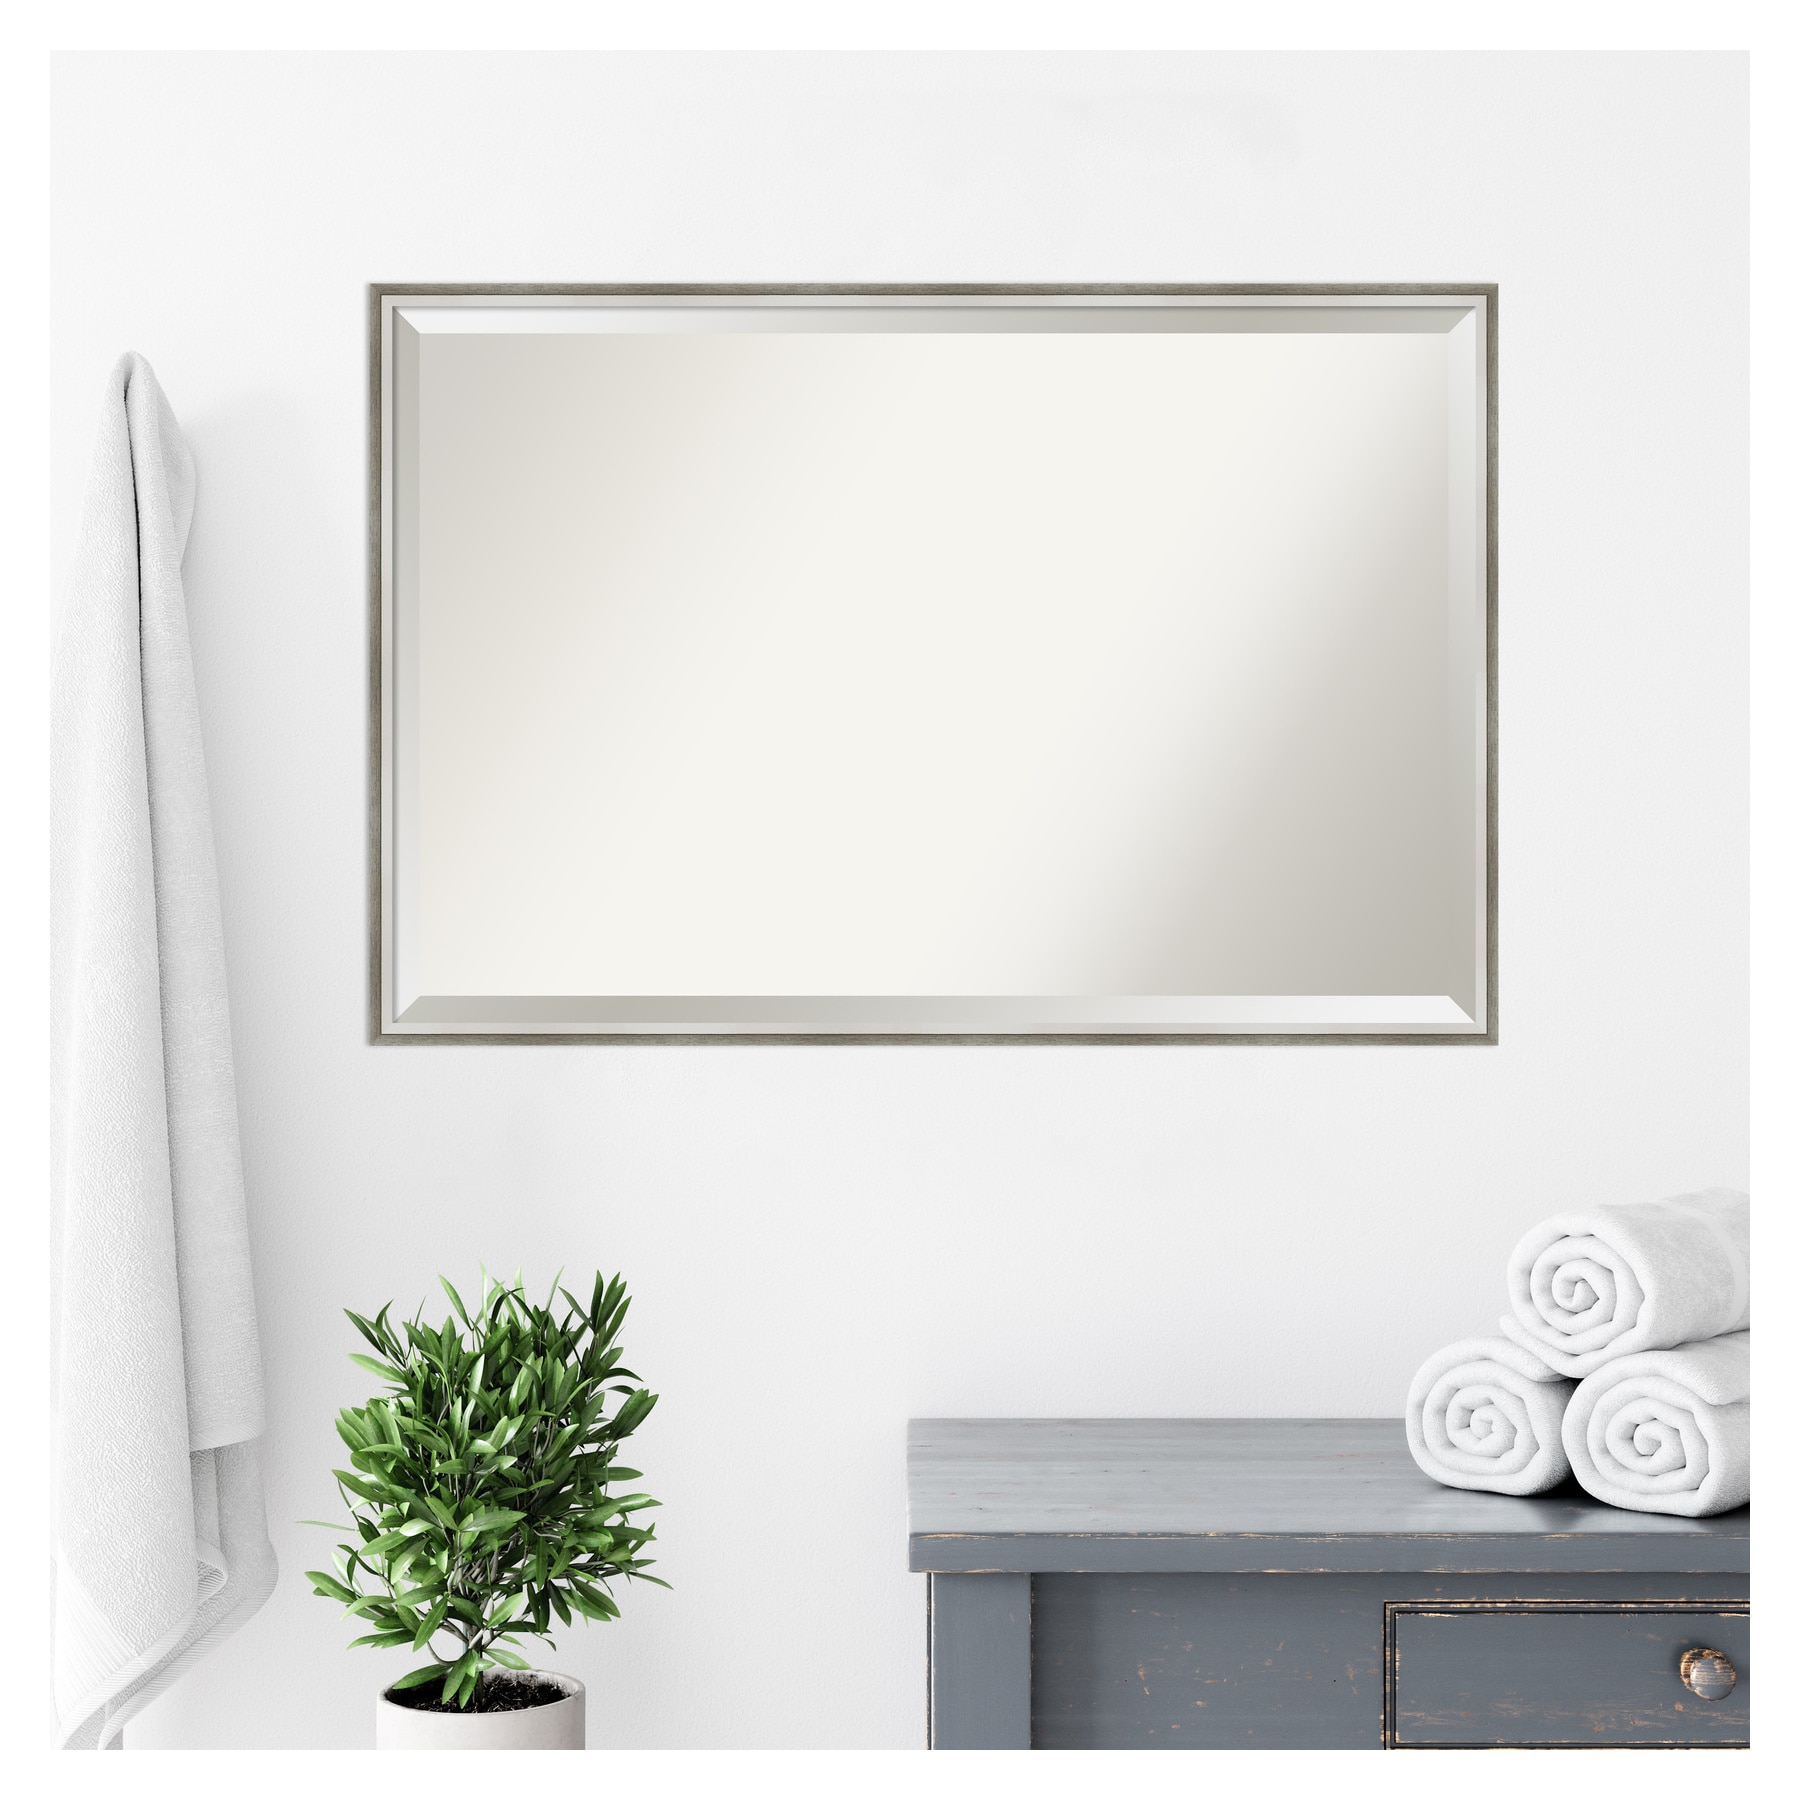 Amanti Art Lucie Frame 37.12-in W x 25.12-in H Silver White Framed Wall ...